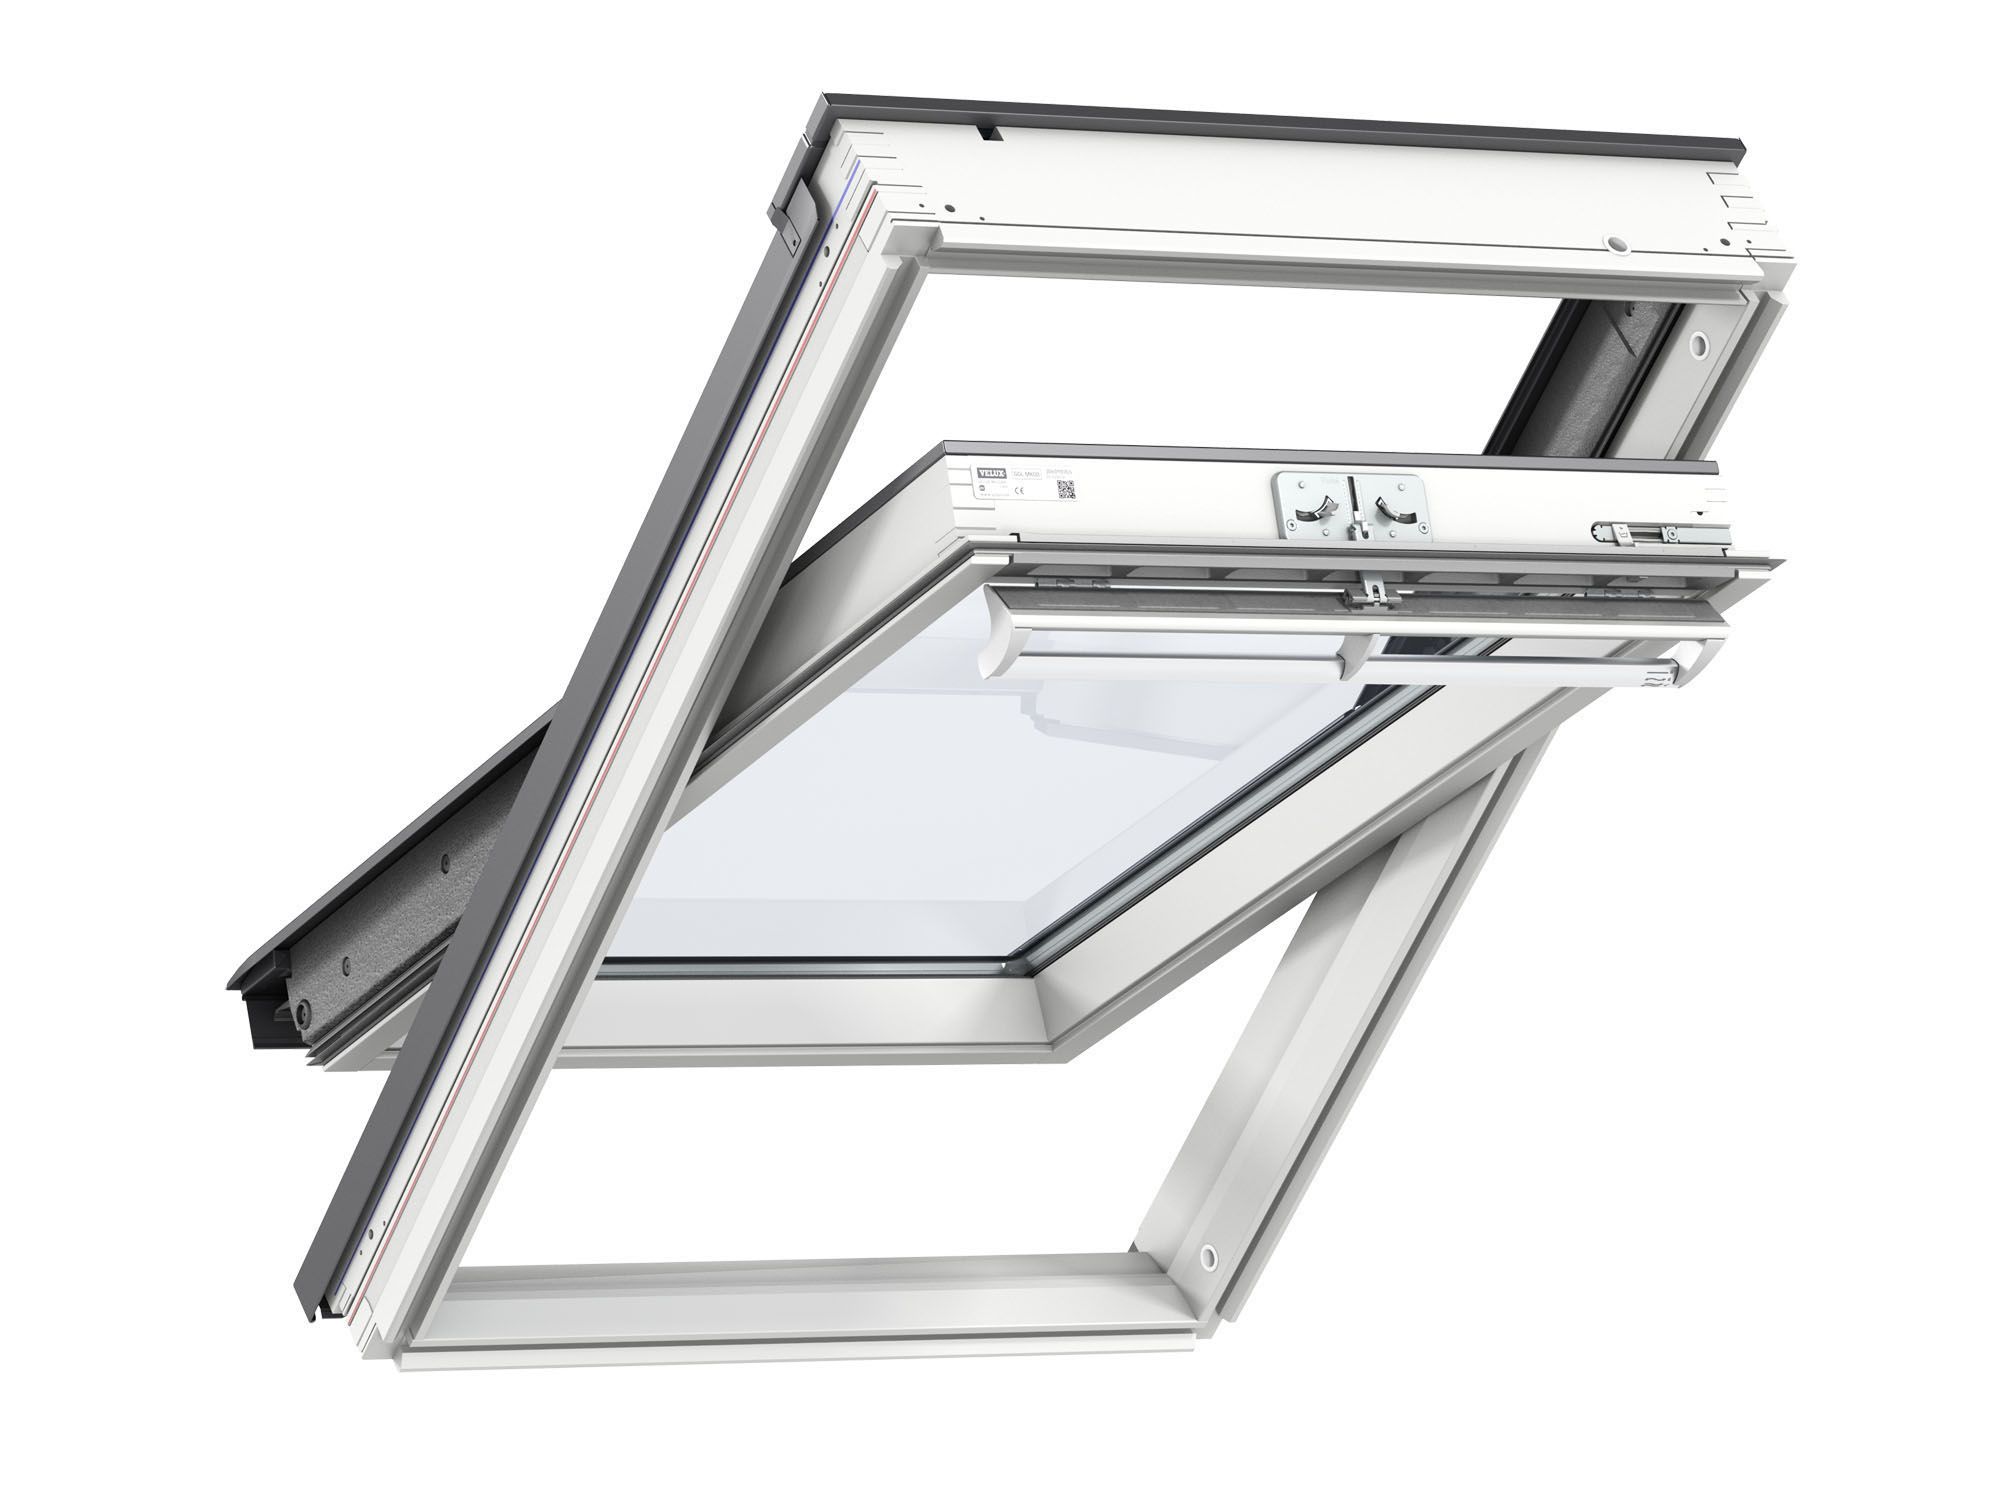 Image of VELUX GGL UK08 2070 White Painted Centre Pivot Roof Window - 1340 x 1400mm